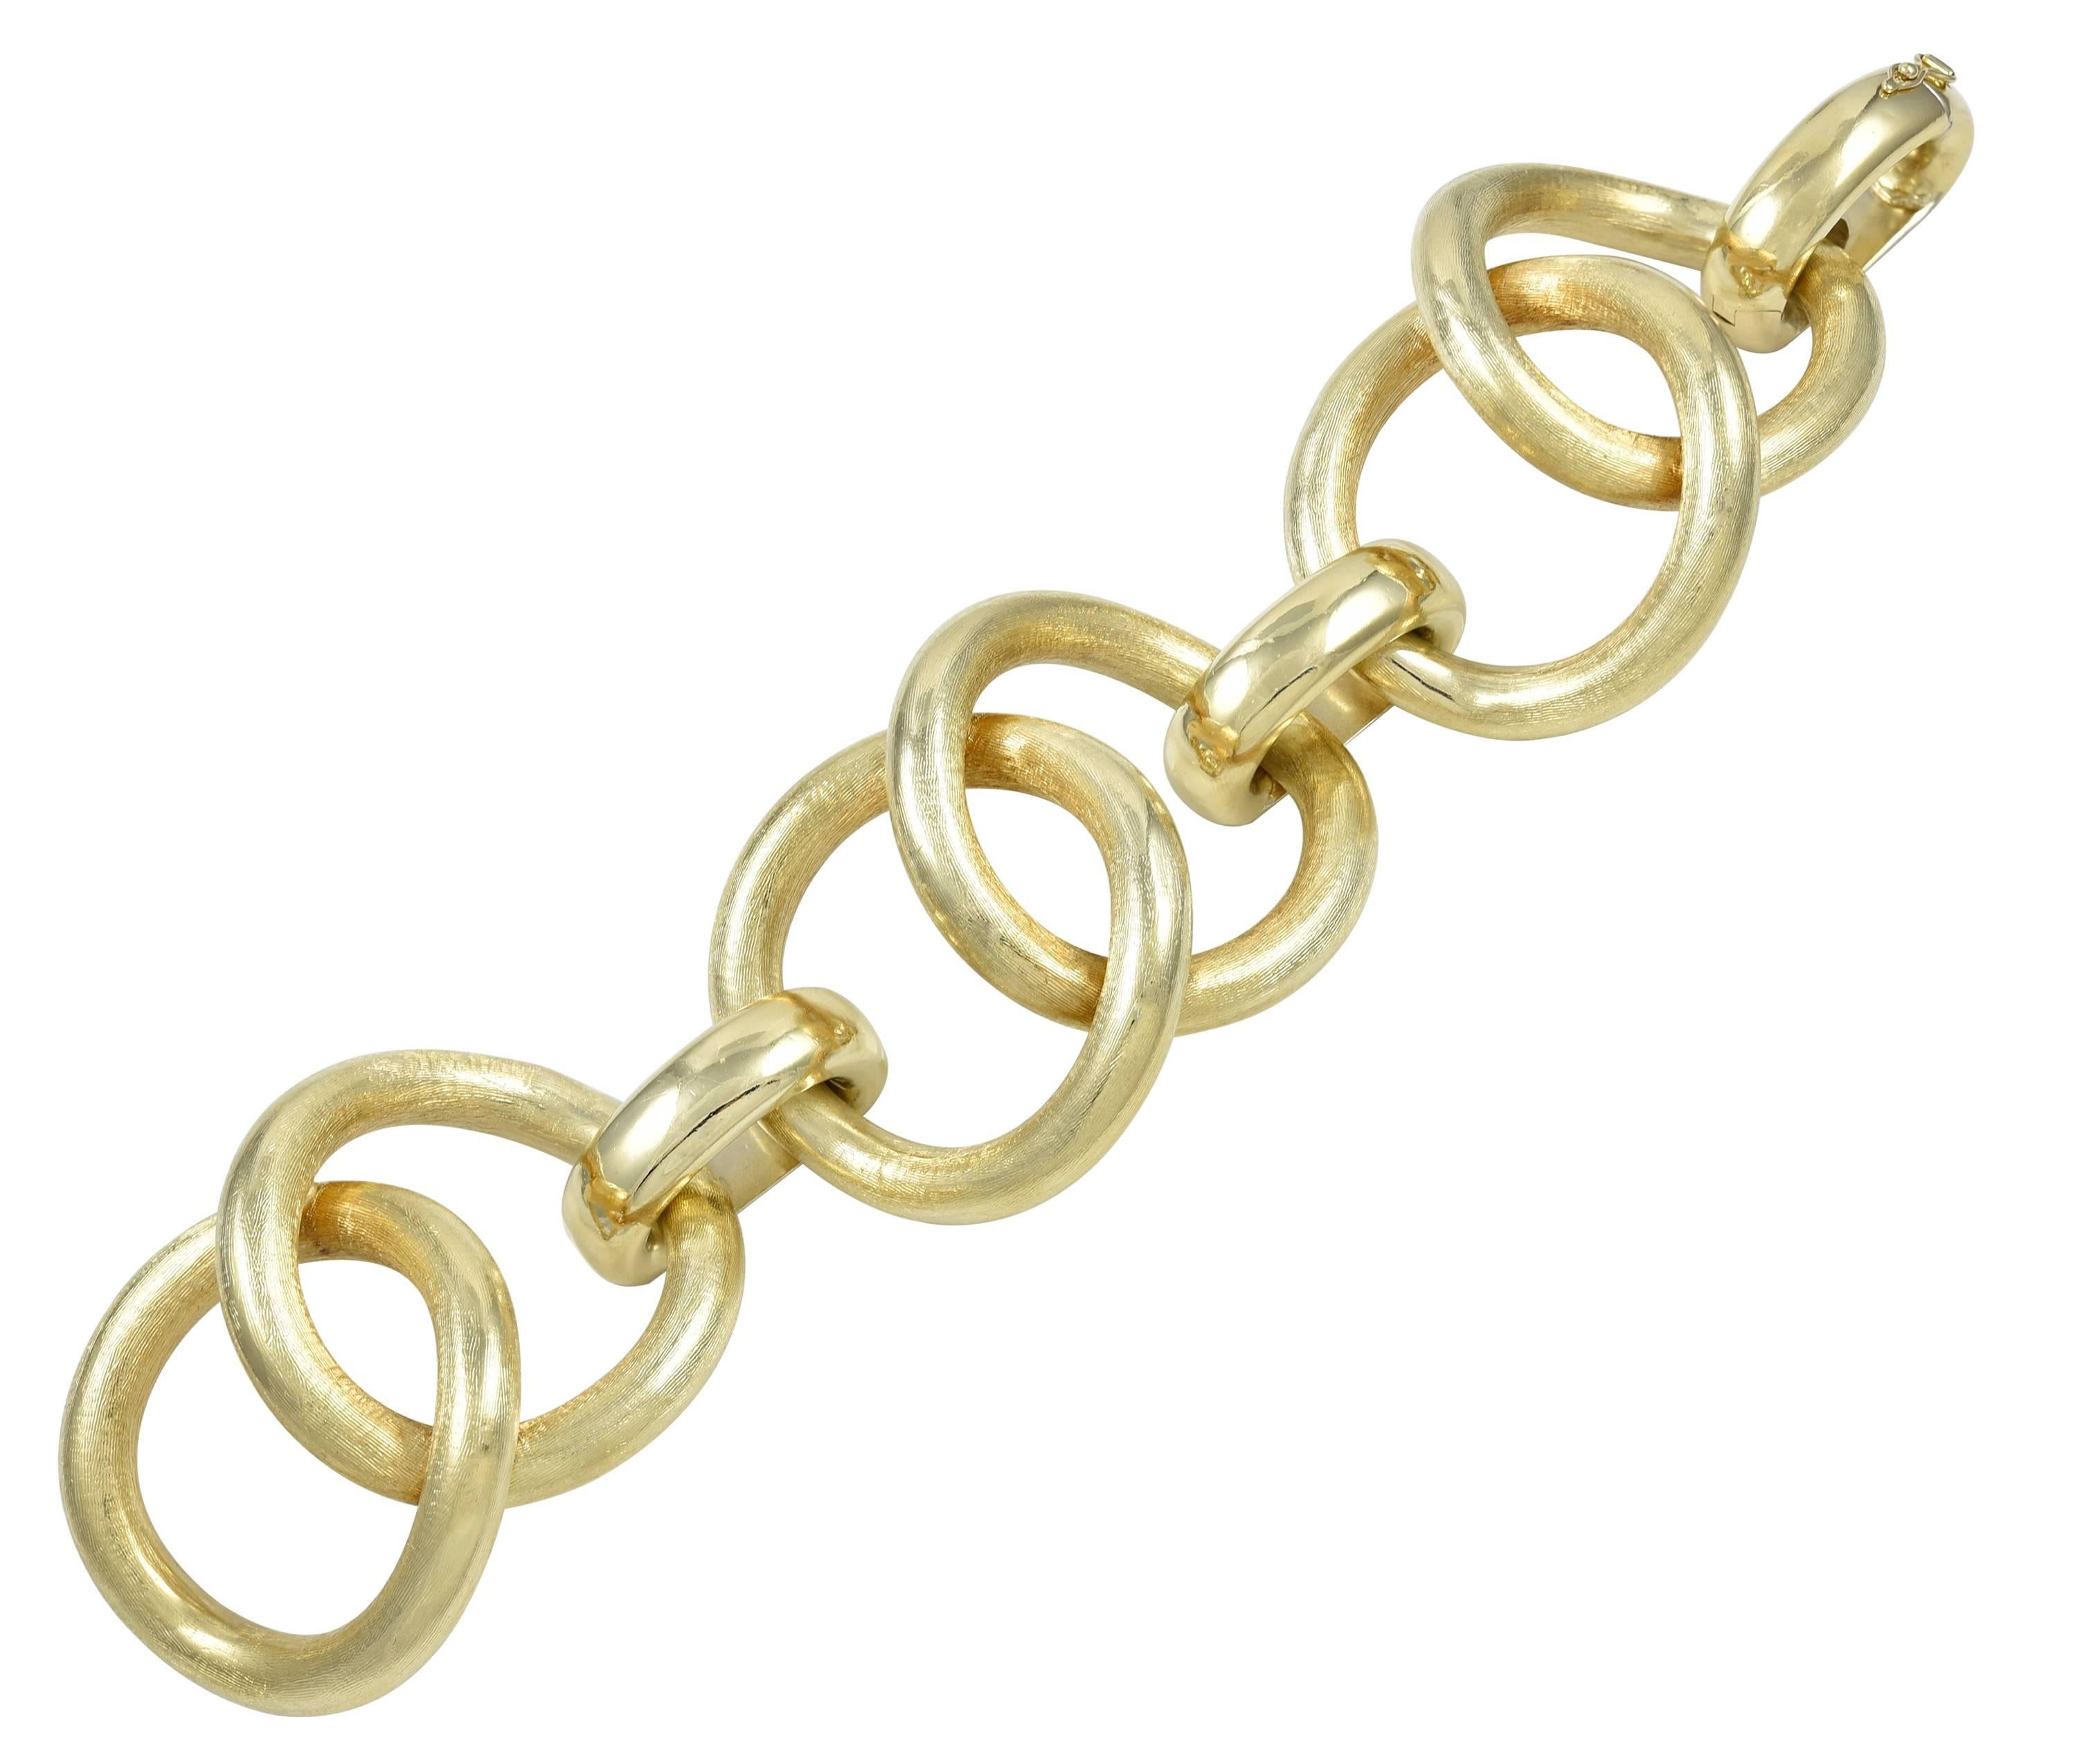 Fabulous 18K yellow gold bracelet.  Textured gold huge links attached by shiny gold oval connecting loops.  8 1/4